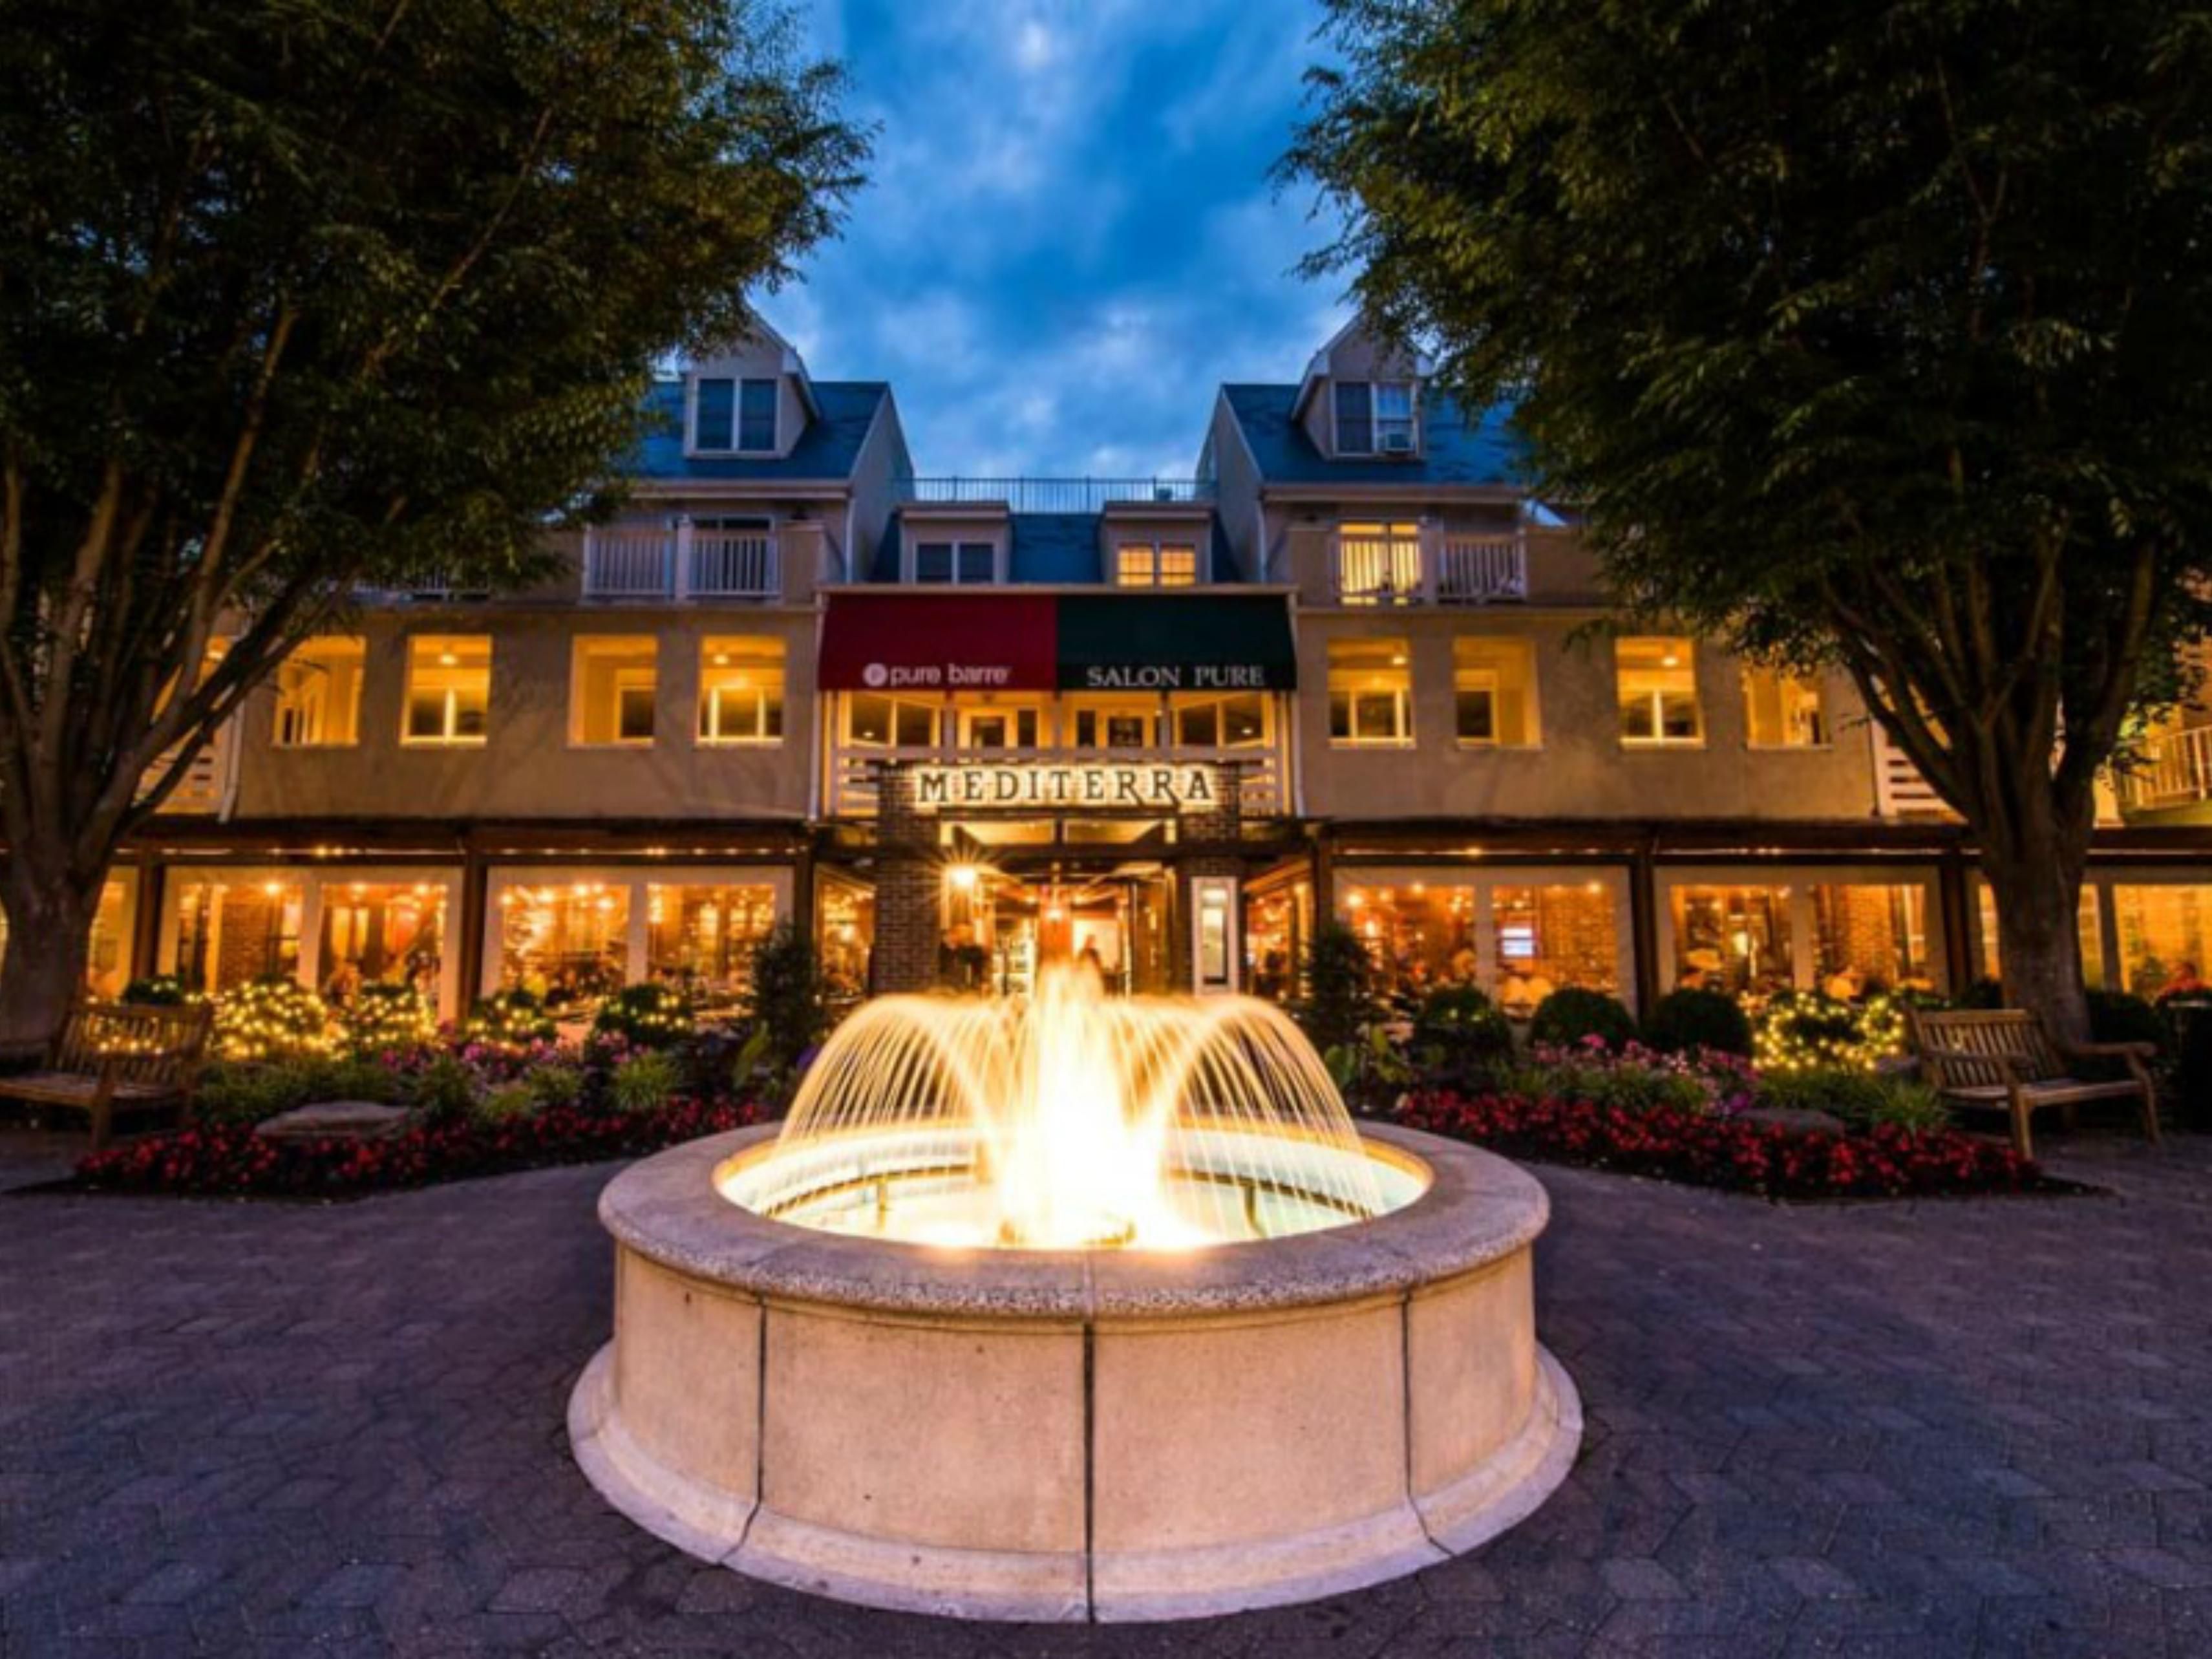 Experience boutique shops, local eatery's and historic Princeton University located within 4 miles of the hotel. Enjoy all the area has to offer!